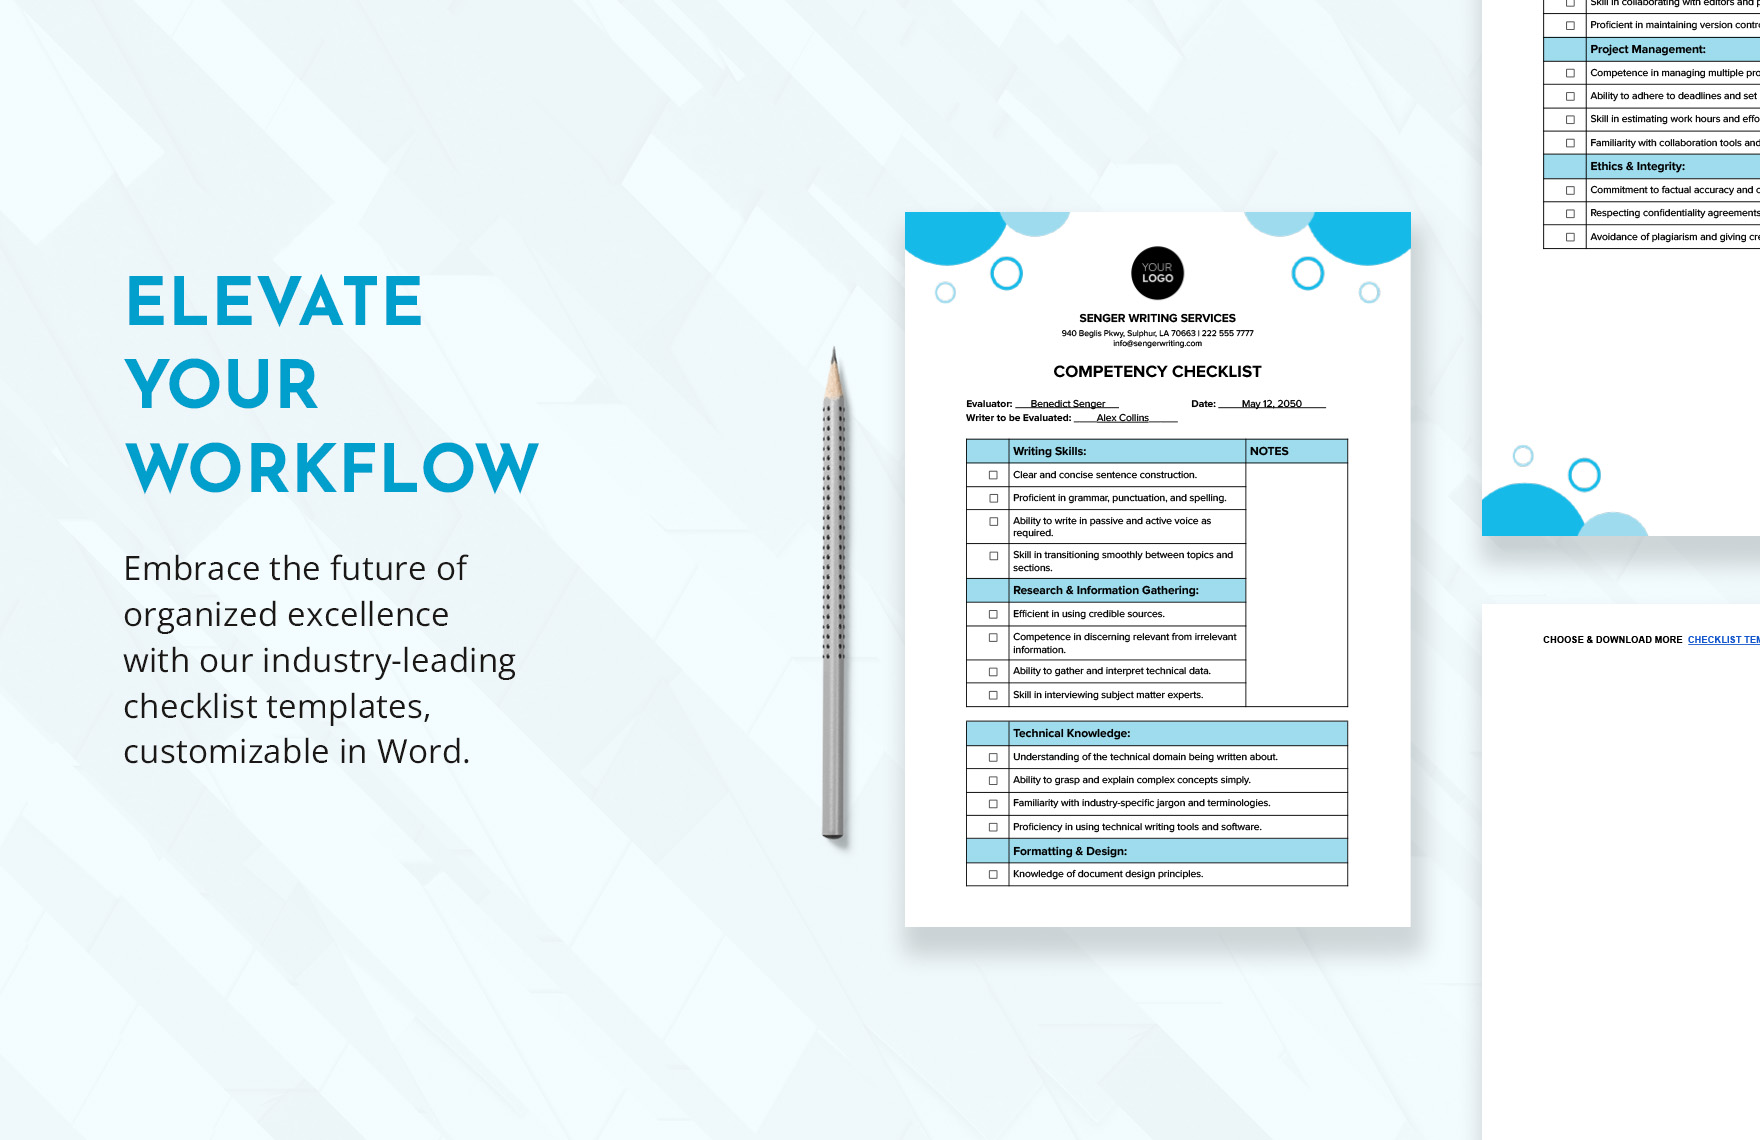 Competency Checklist Template